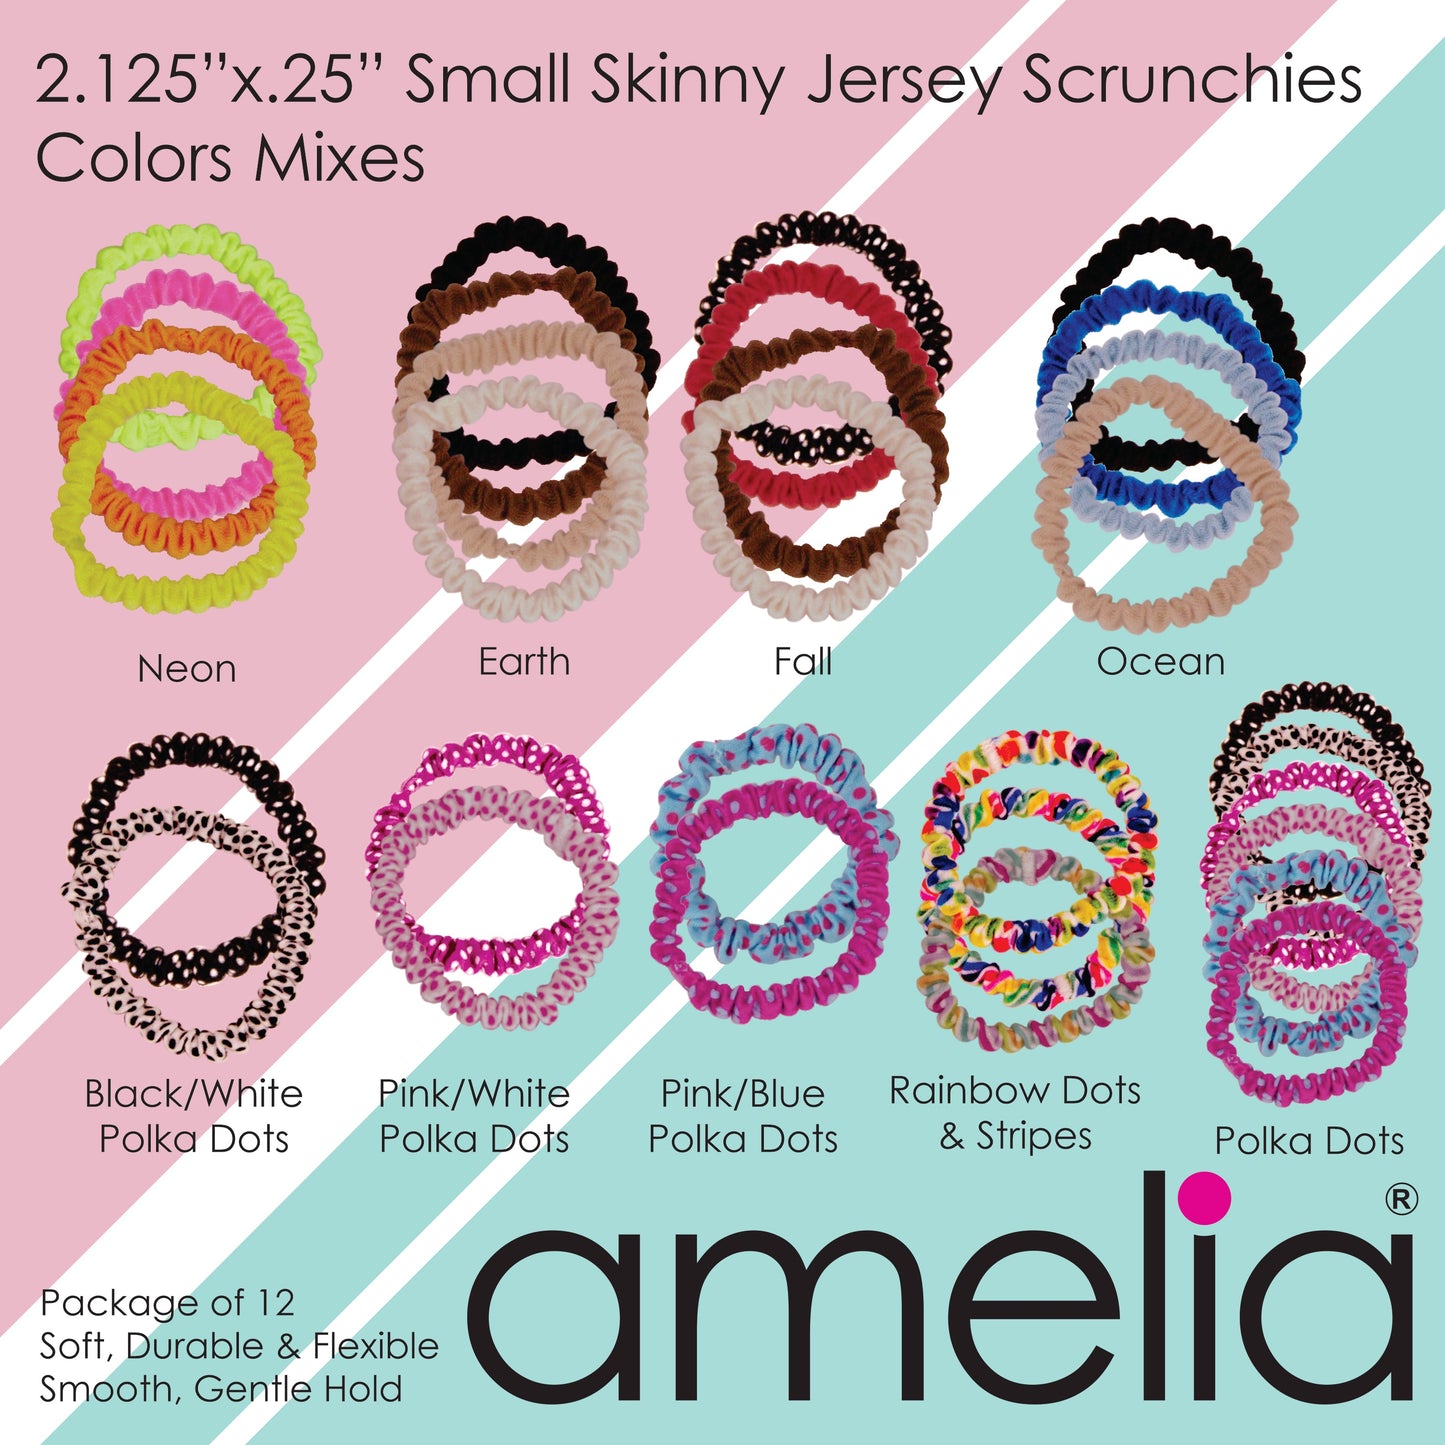 Amelia Beauty, Polka Dot and Stripe Mix Skinny Jersey Scrunchies, 2.125in Diameter, Gentle on Hair, Strong Hold, No Snag, No Dents or Creases. 12 Pack